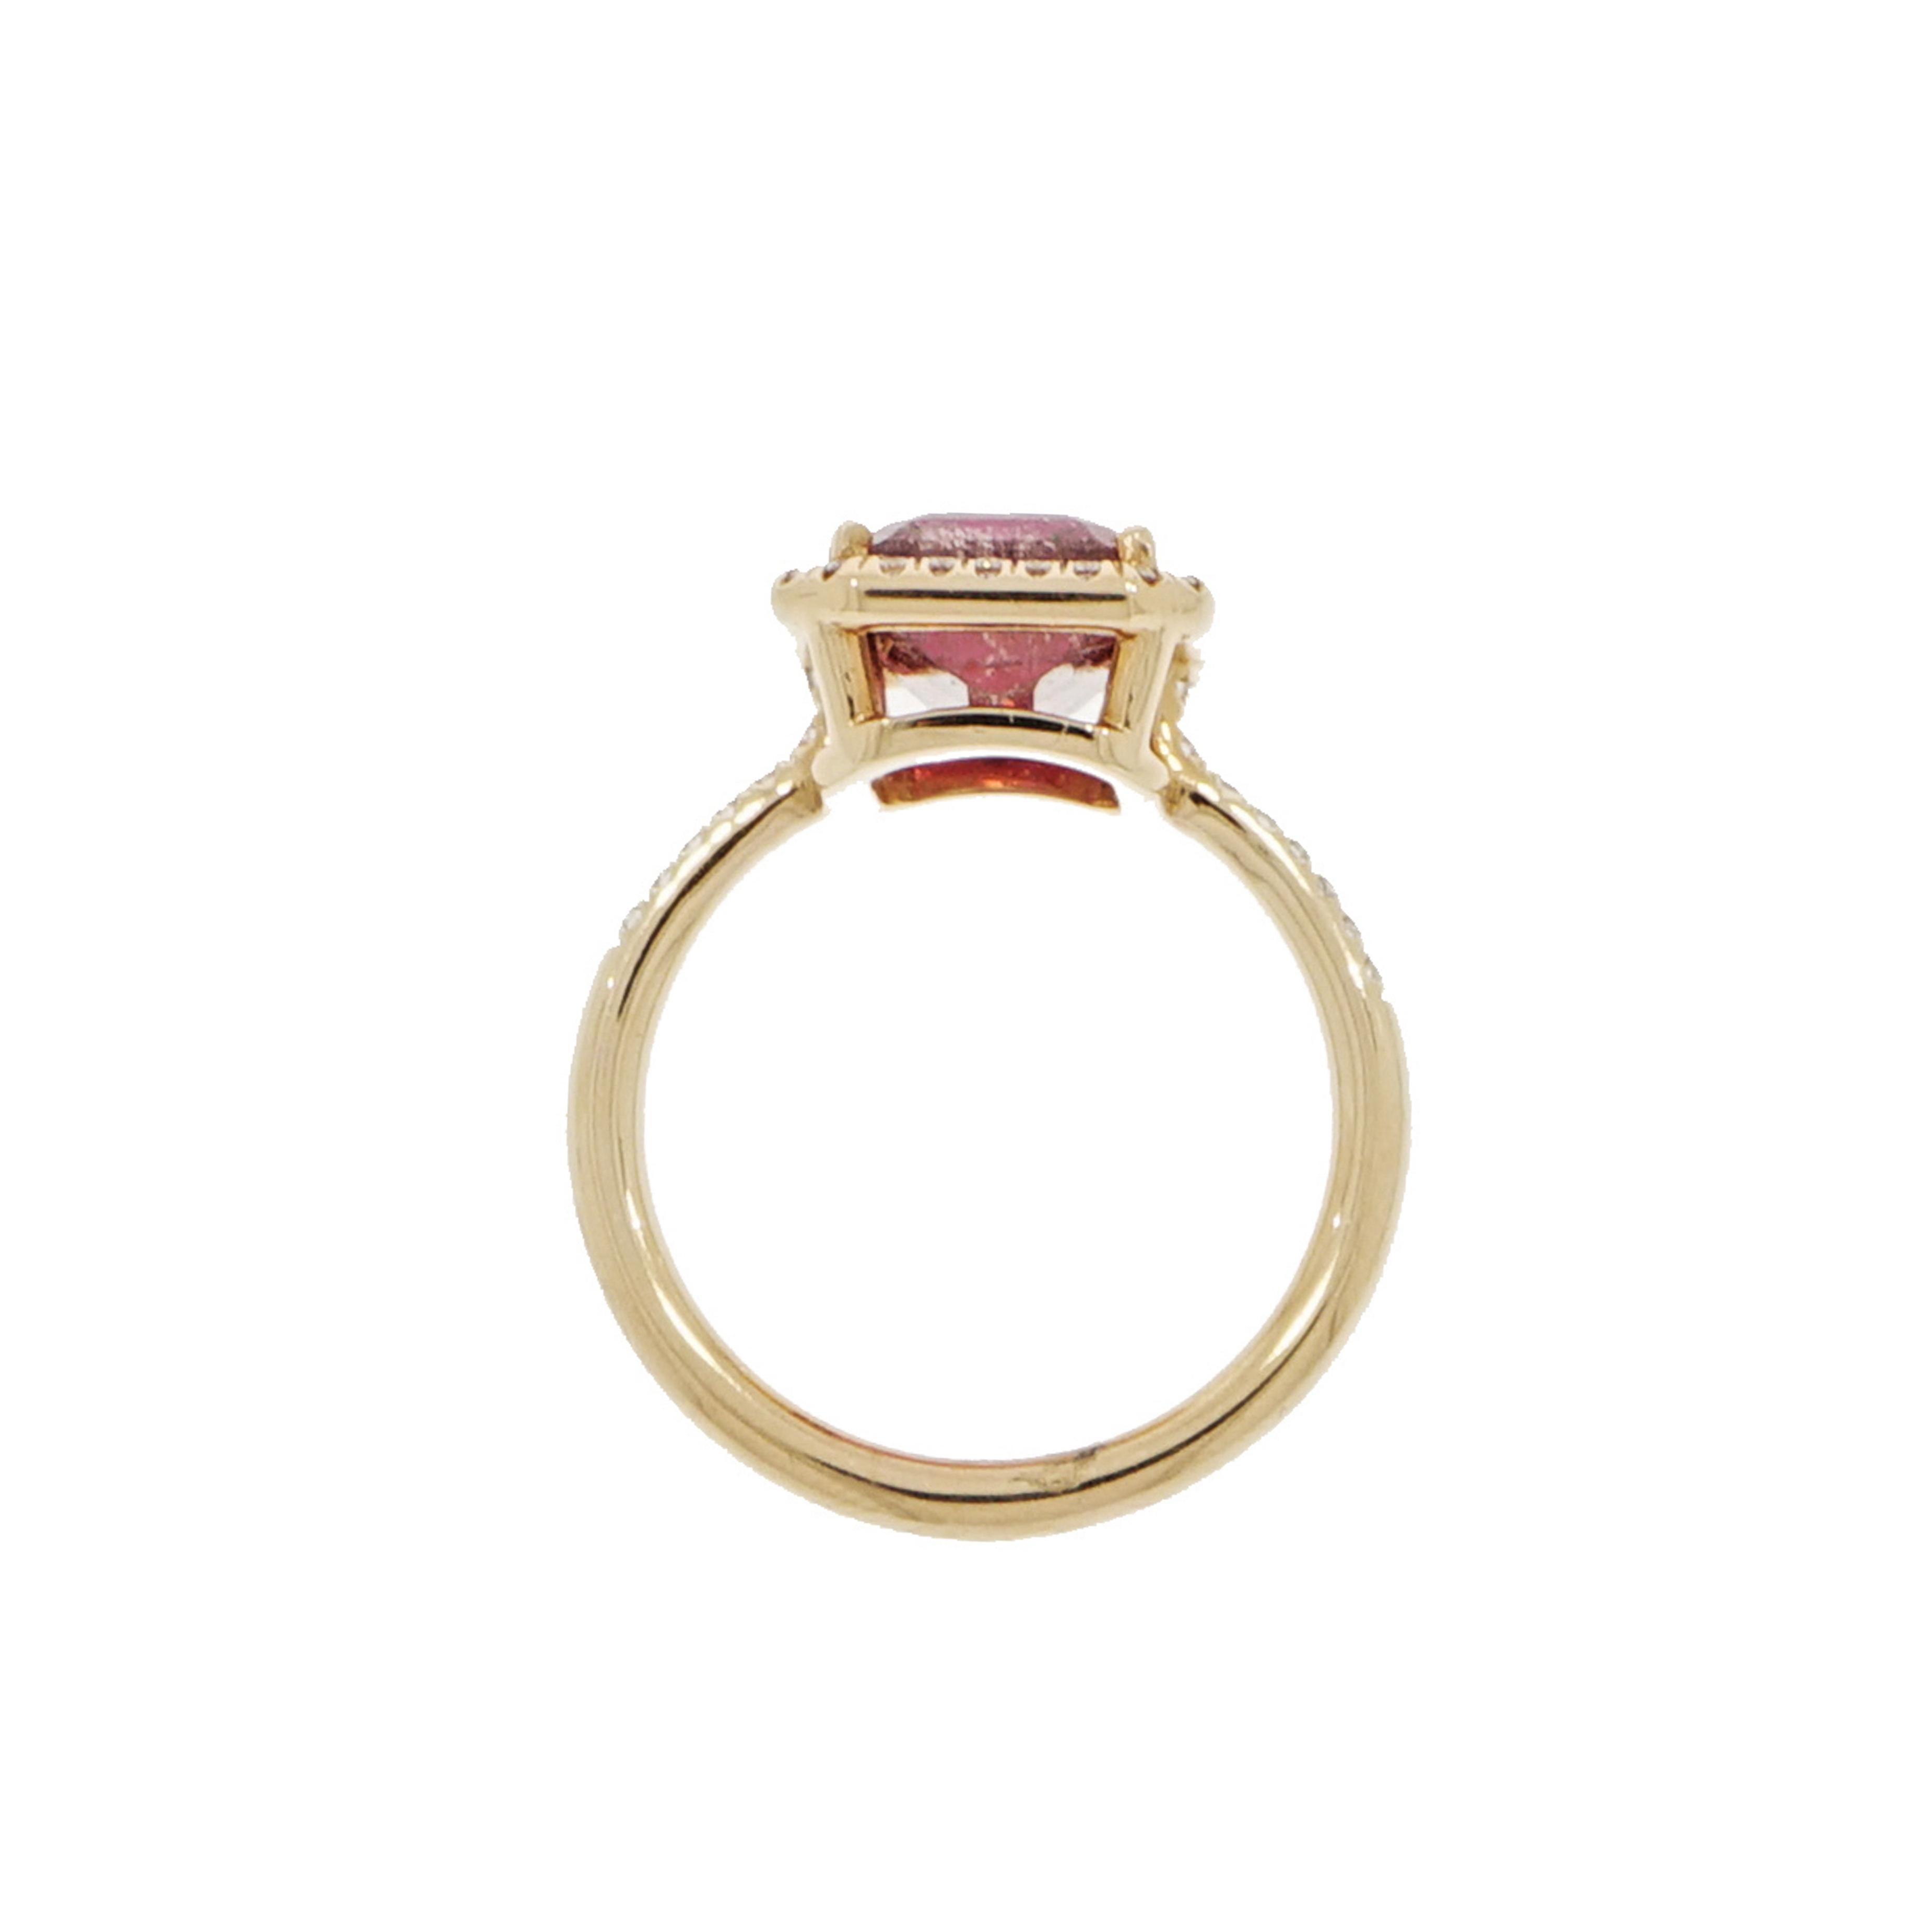 Refreshingly Delicious.... This emerald cut Watermelon Tourmaline and Diamond Rose Gold Ring with clean lines and architectural curves is never out of style when it comes to fine jewelry.
Designed and crafted in NYC in 18k Rose Gold and accented